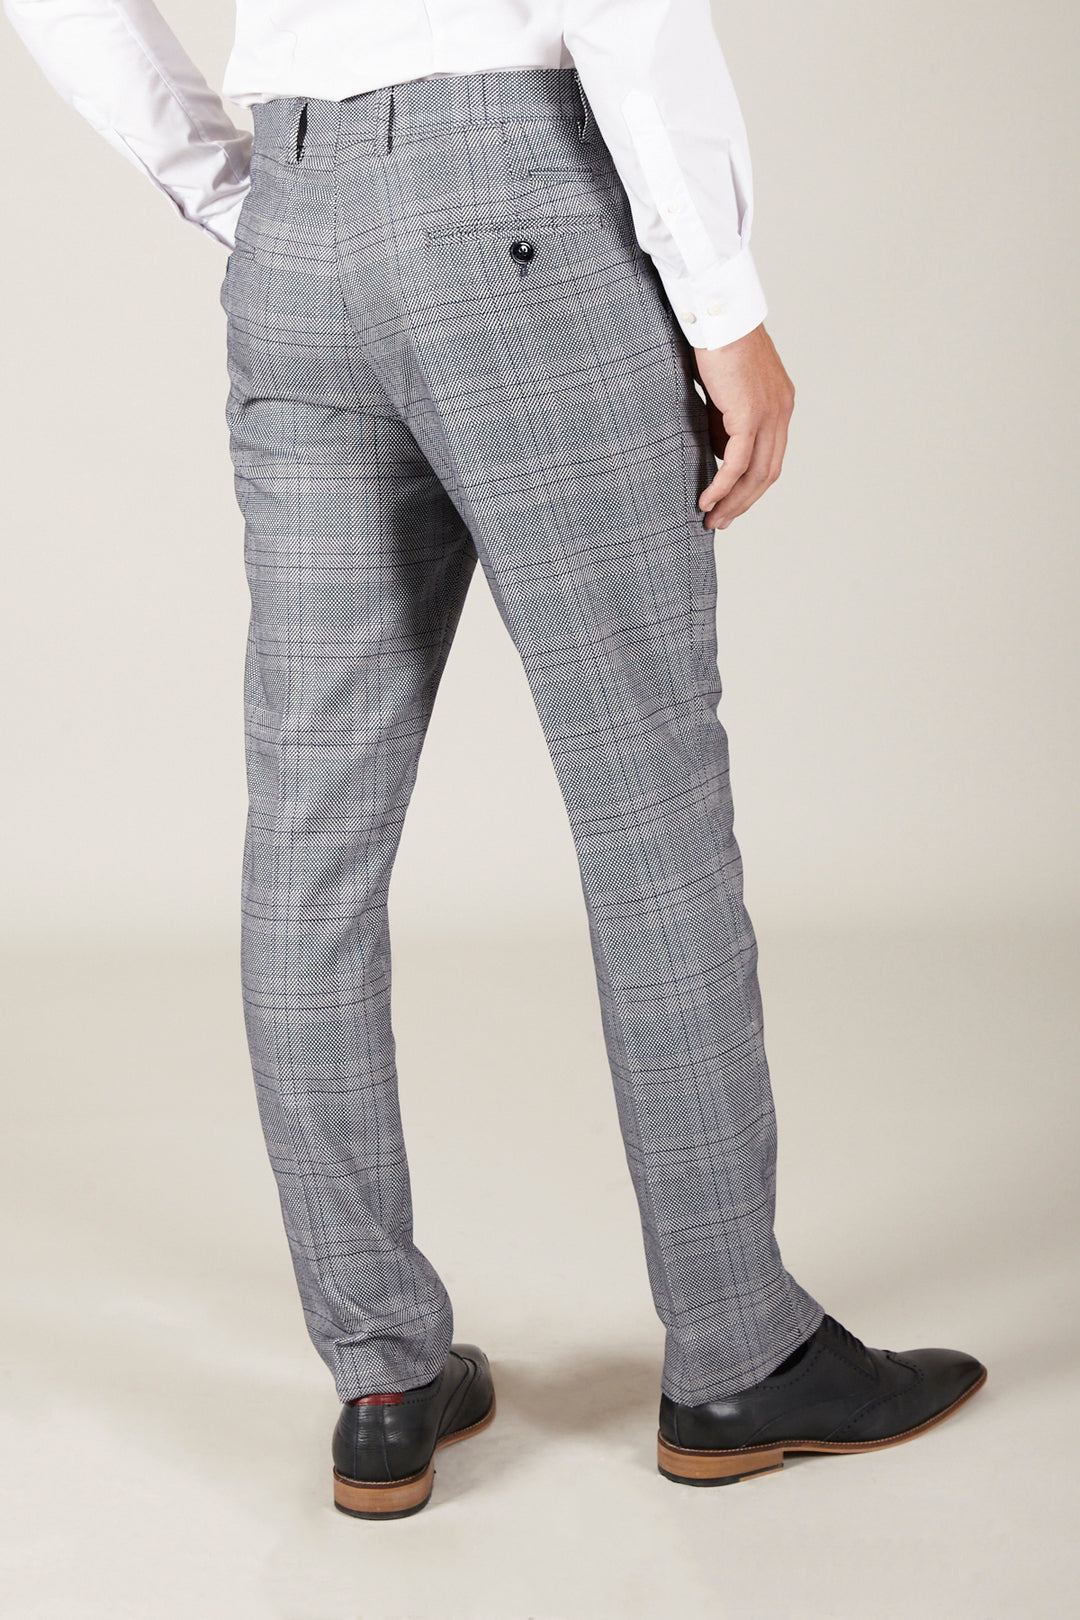 JERRY - Grey Check Suit With Kelvin Pink Waistcoat